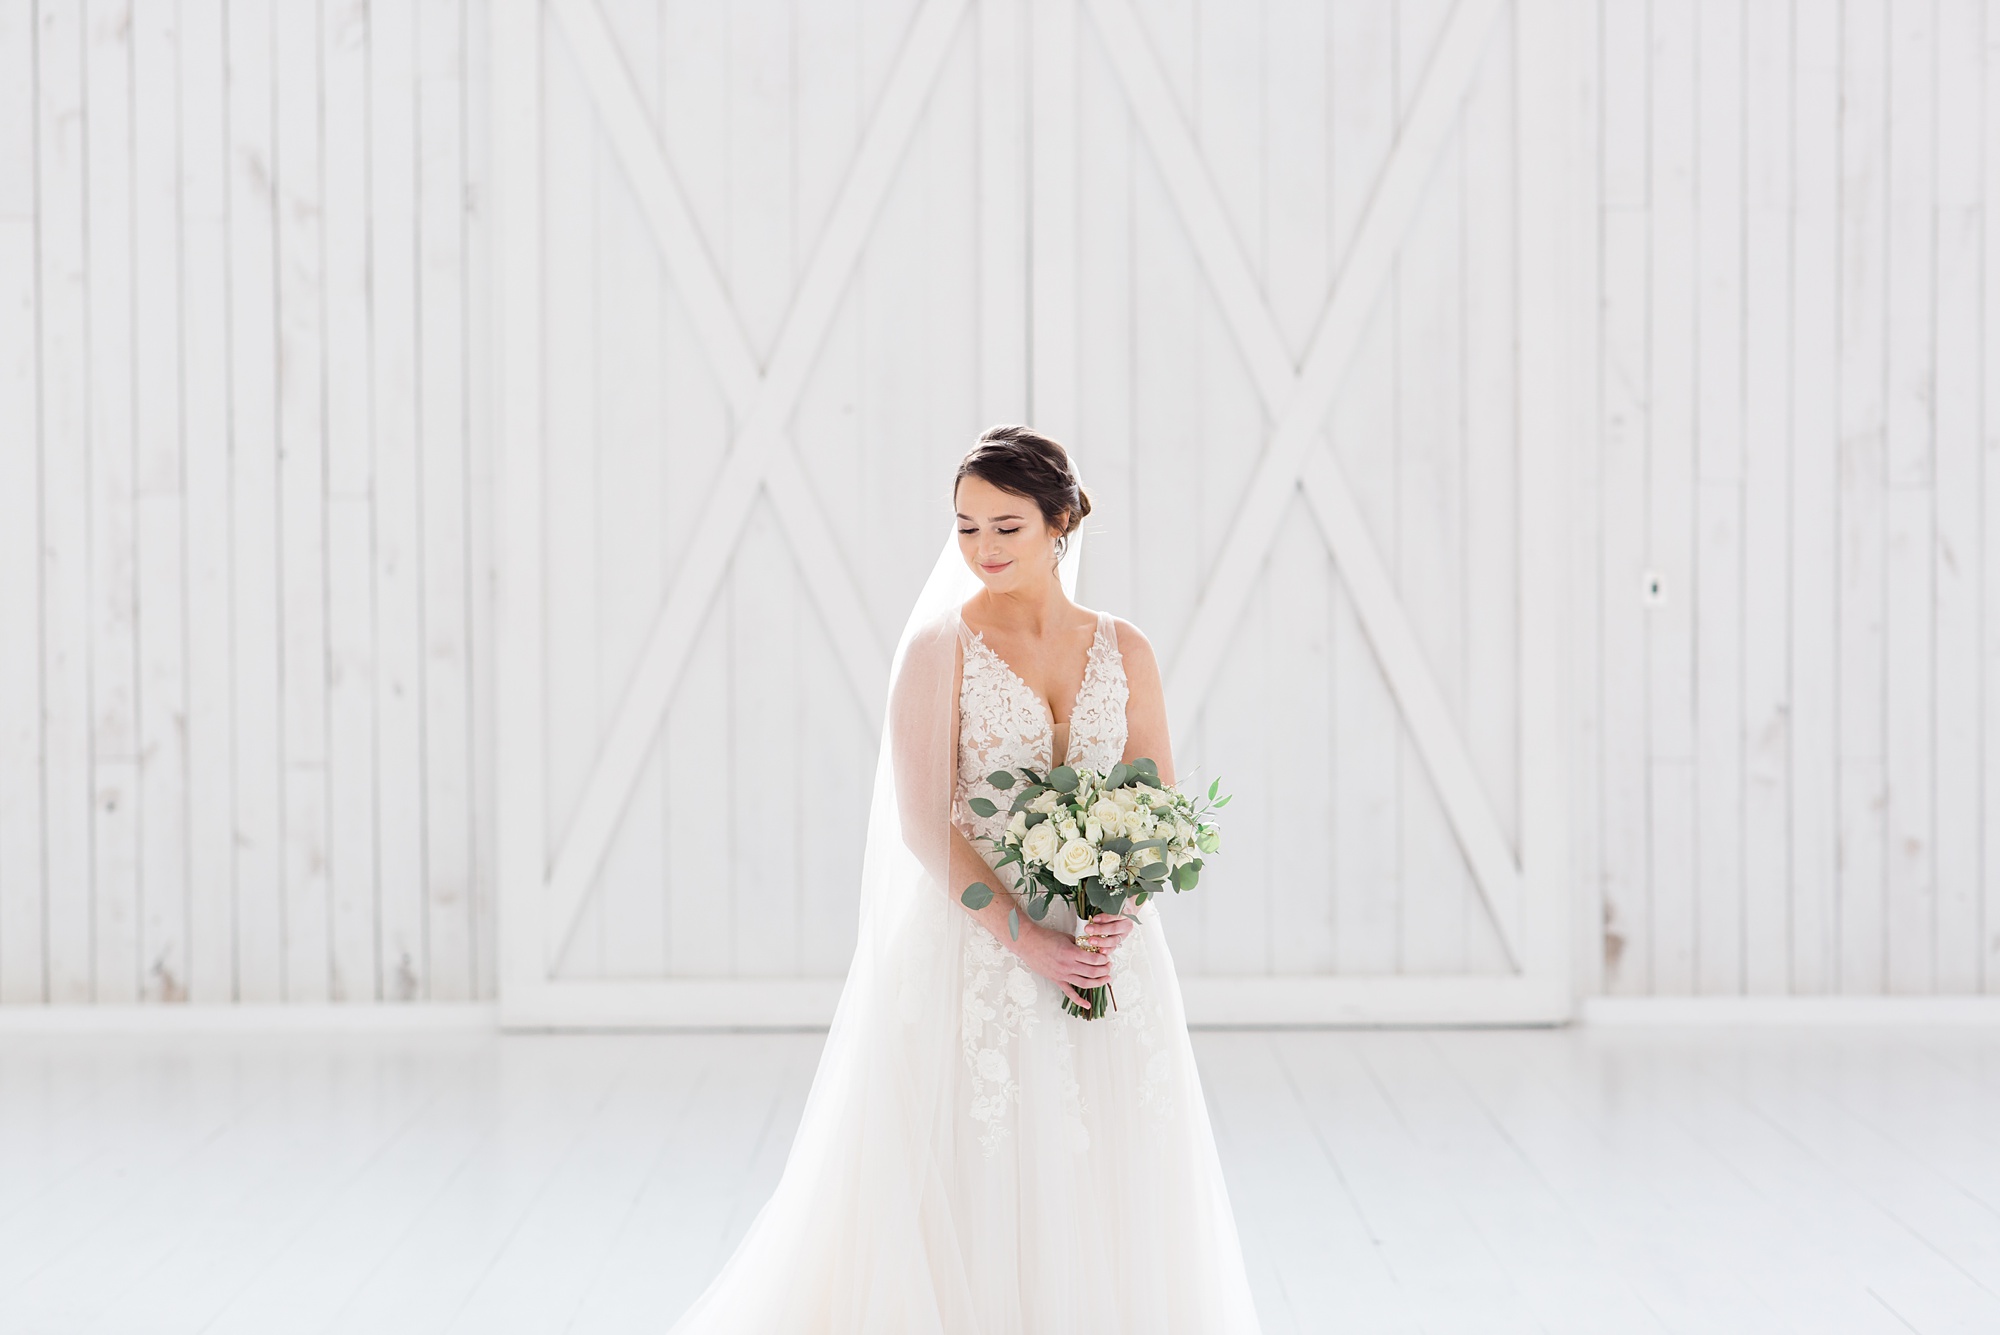 Texas bridal portraits in front of white barn doors